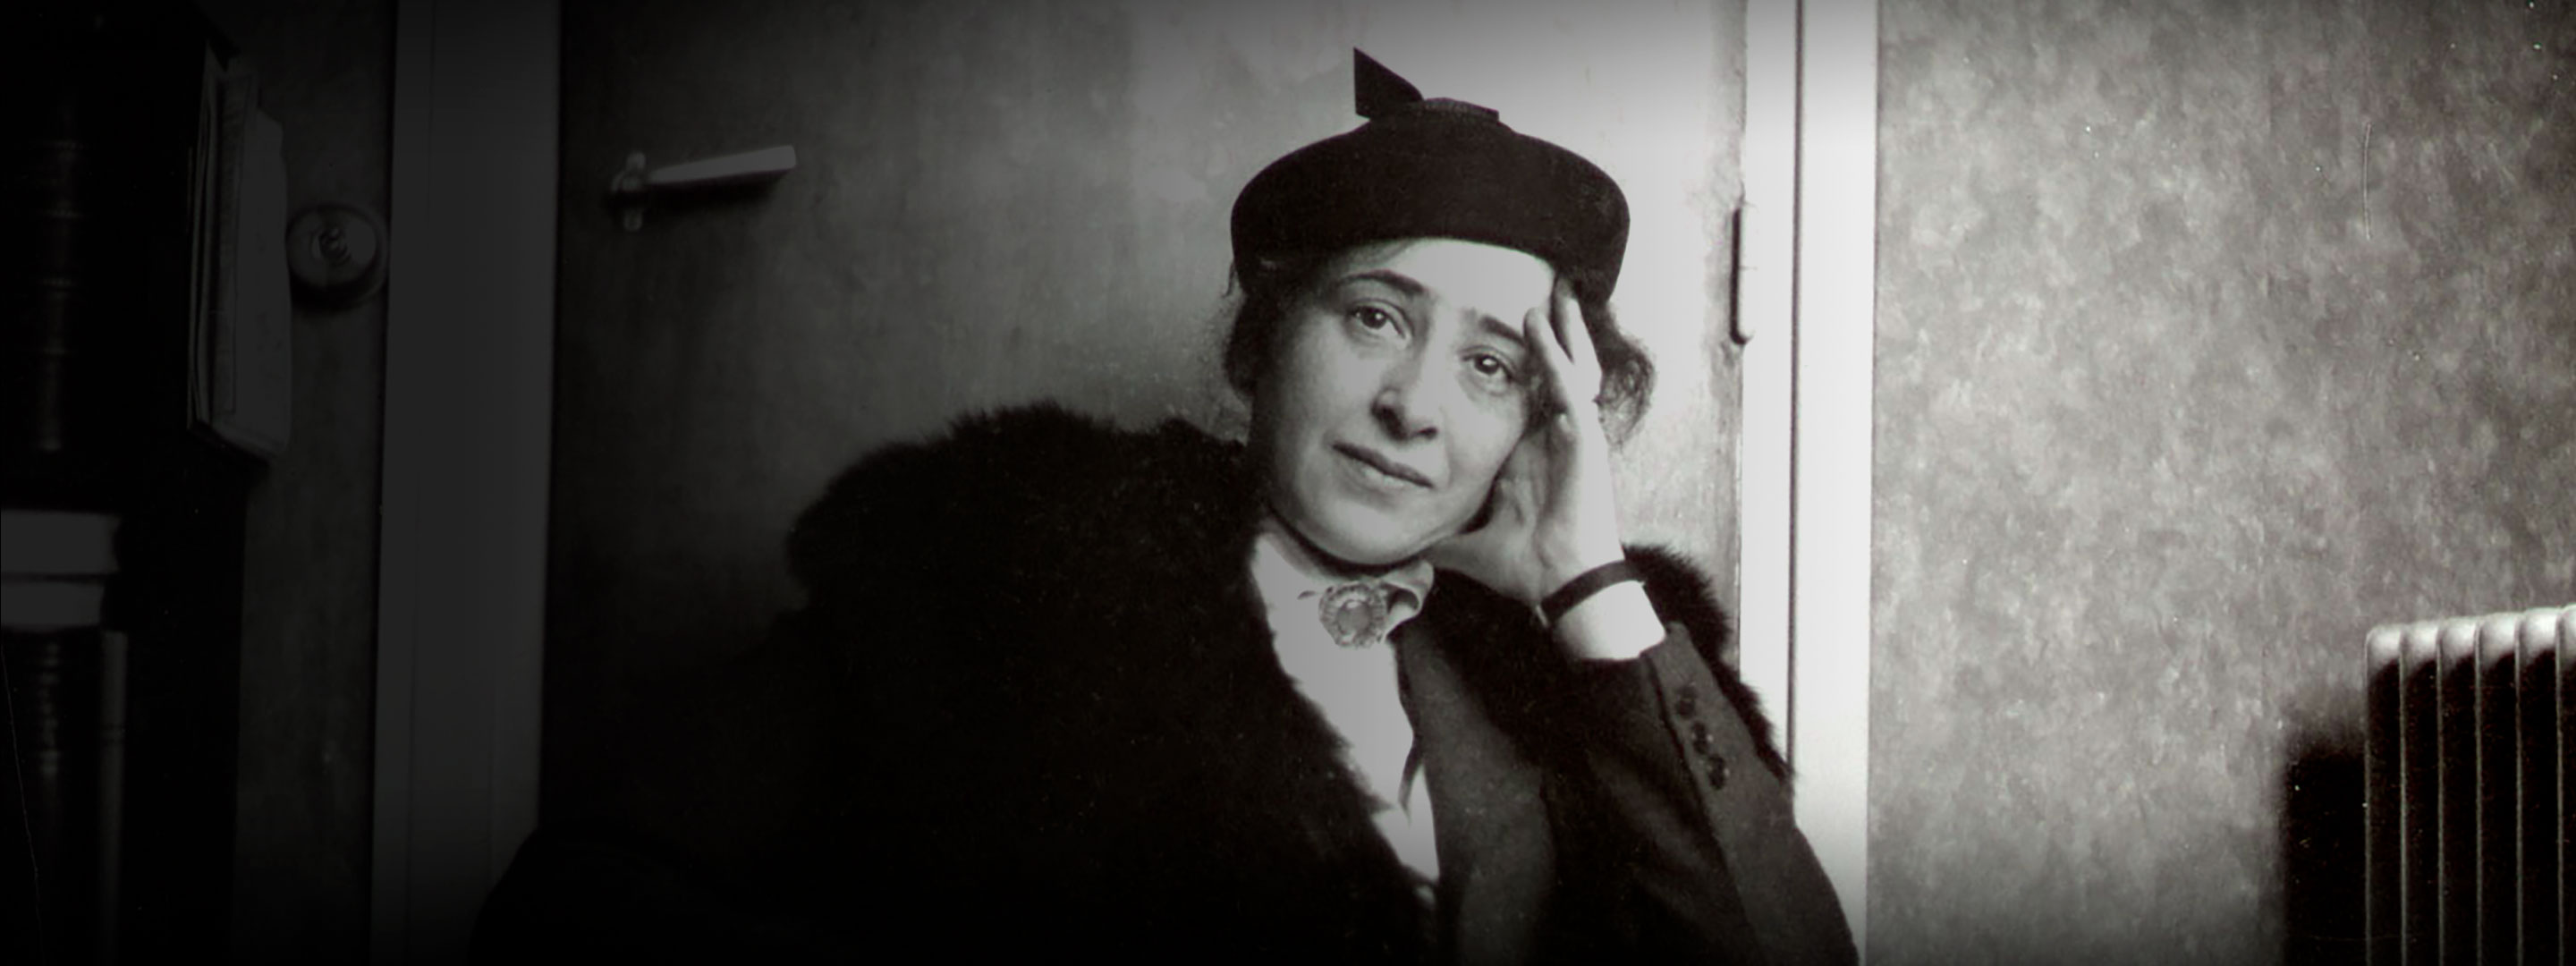 Main Image for About Hannah Arendt